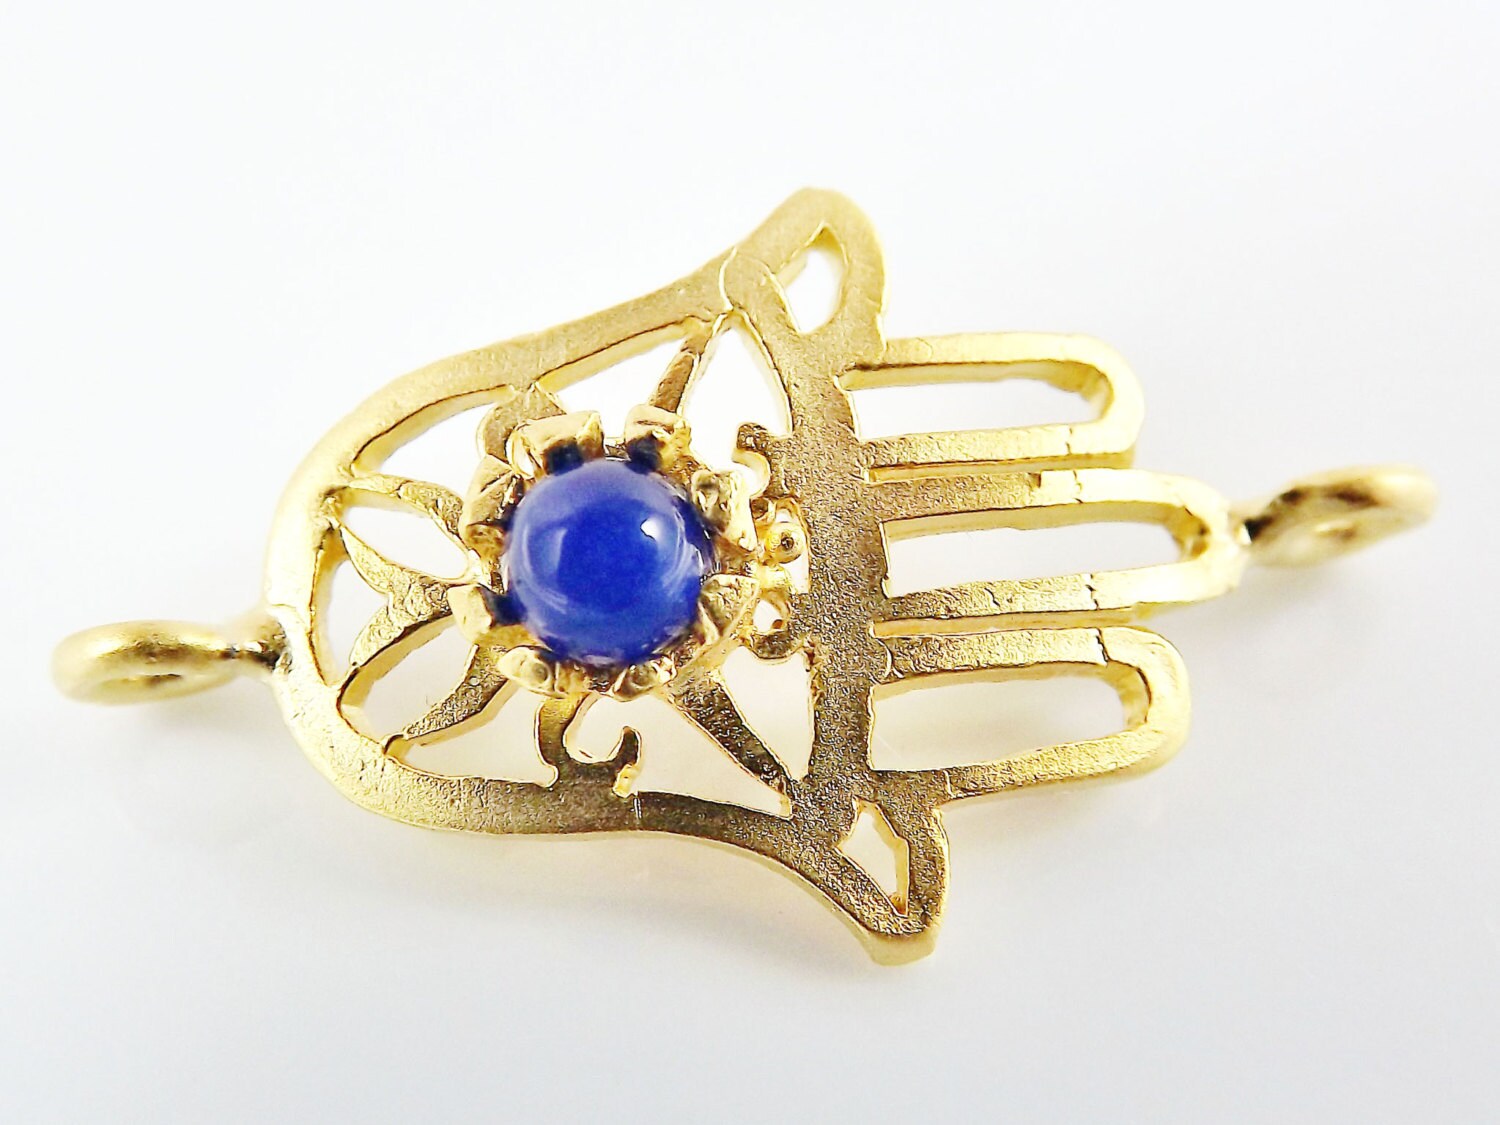 Hamsa Hand of Fatima Connector with Royal Blue Jade Stone - 22K Matte Gold Plated